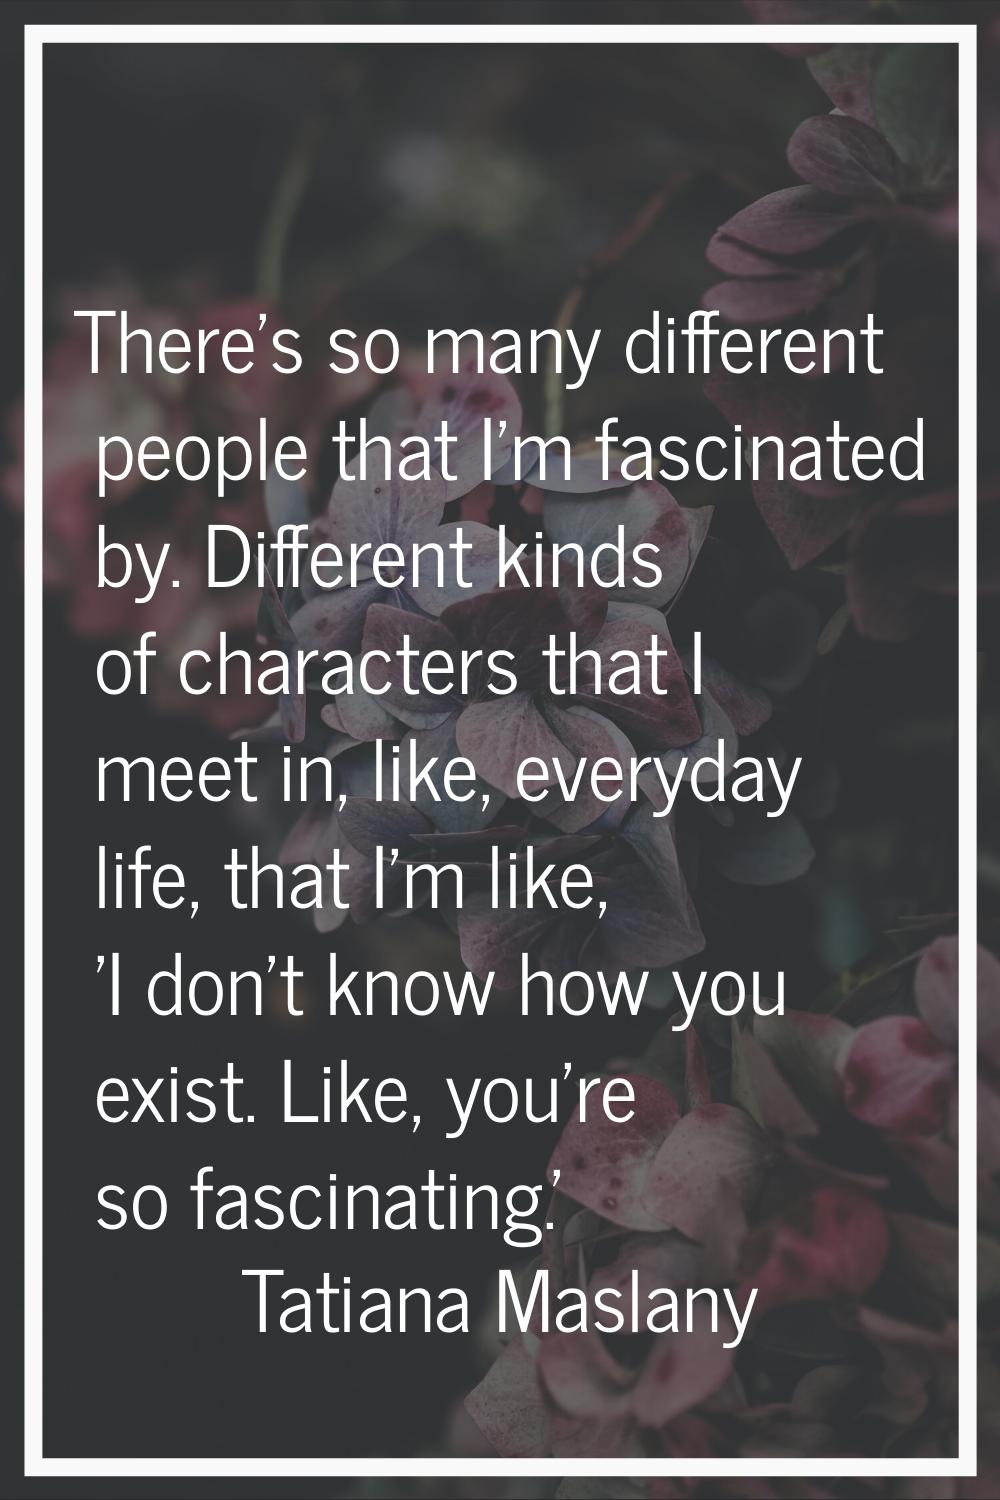 There's so many different people that I'm fascinated by. Different kinds of characters that I meet 